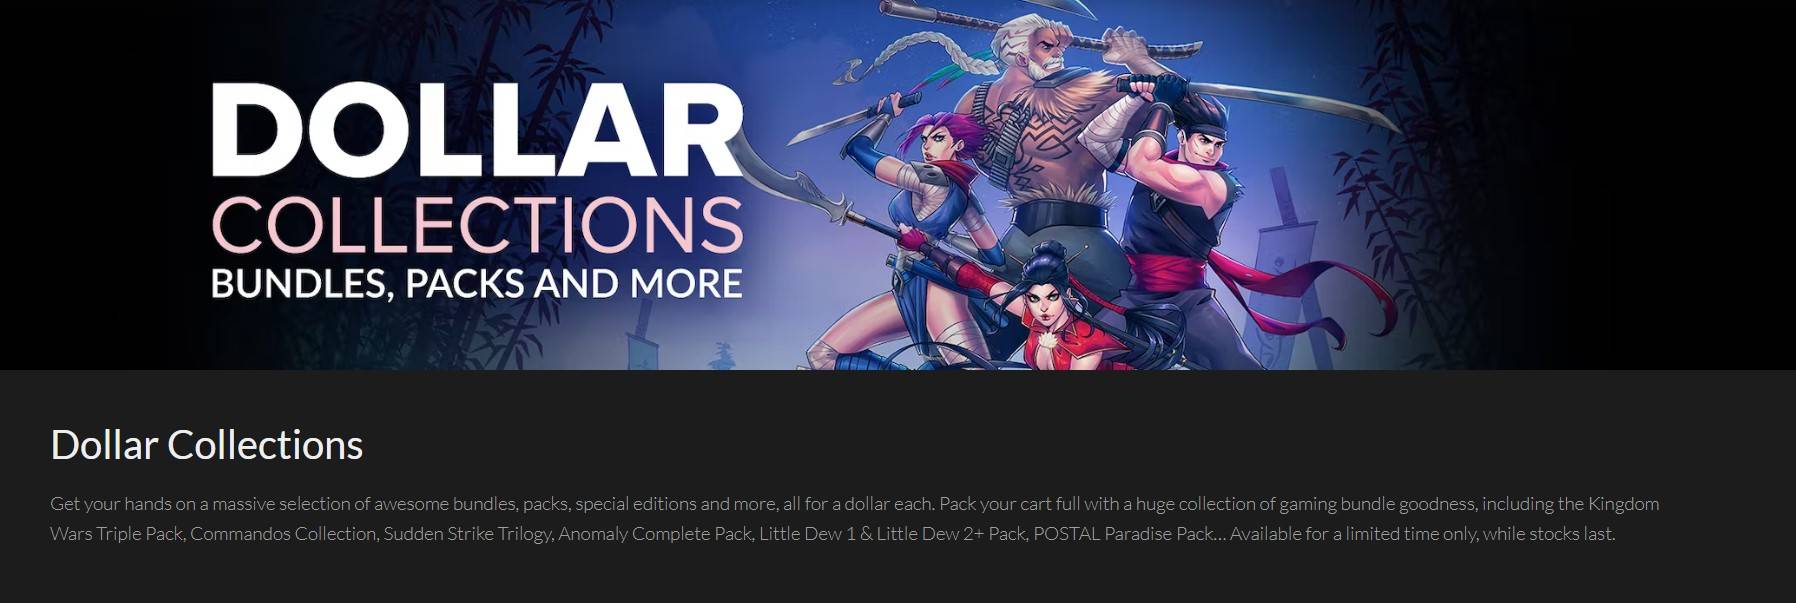 Dollar Collections Sales Bundle Offers Great RPG For Just $1